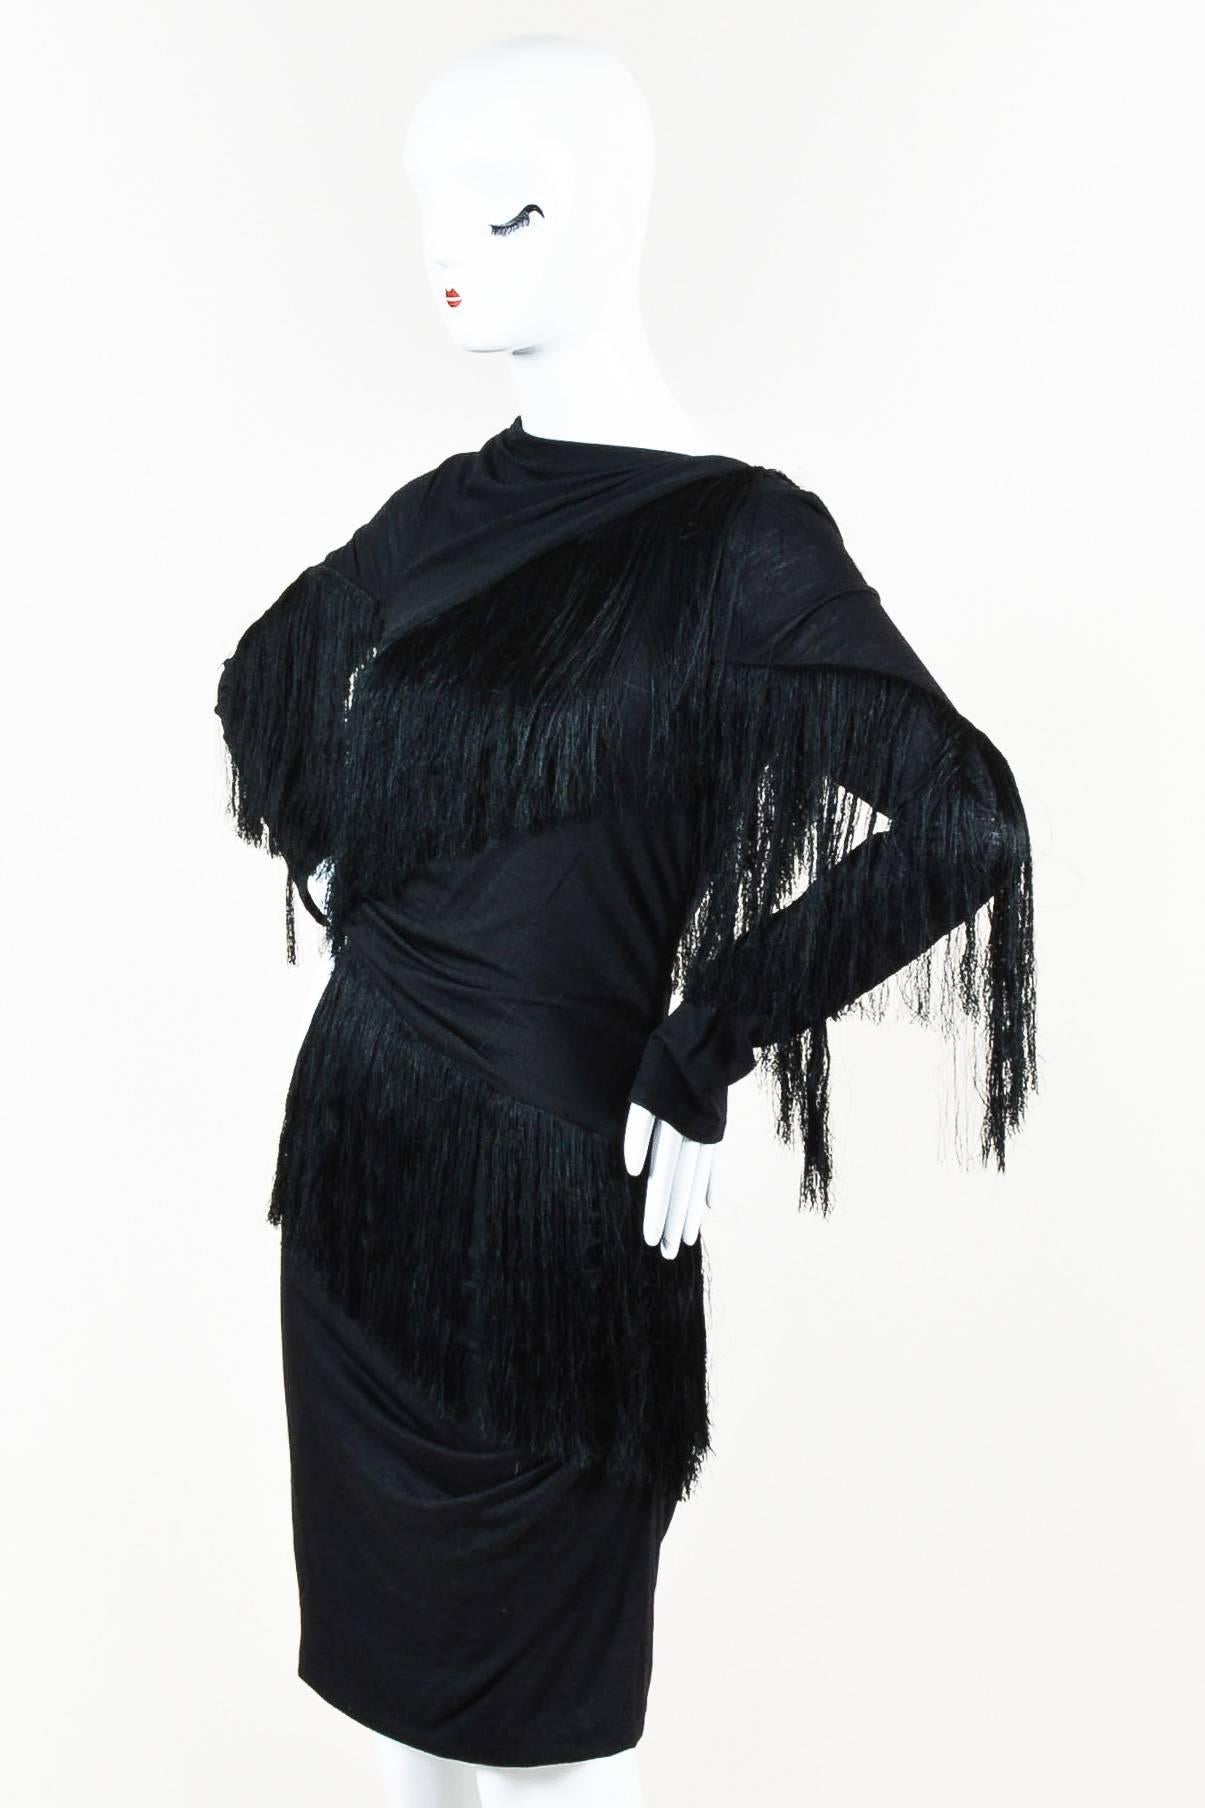 This slinky 'little black dress' was made for cocktail hour. Constructed of a soft and stretchy jersey textile. Long, fine fringe hangs diagonally throughout. Long sleeves. Draped neckline; asymmetric back. Concealed zipper closure at